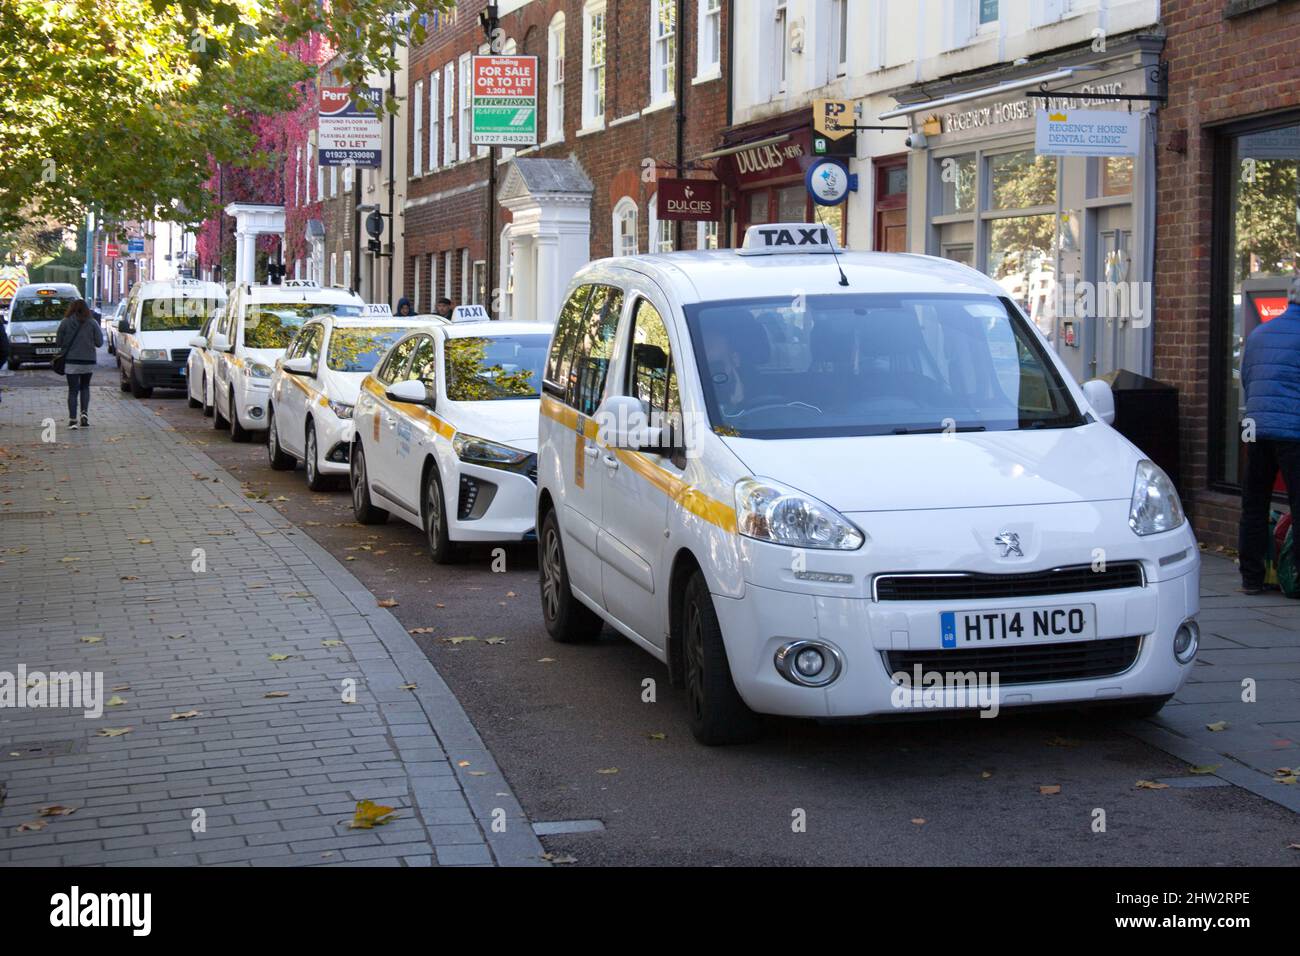 Taxis in a taxi rank in St Albans, Hertfordshire in the UK Stock Photo